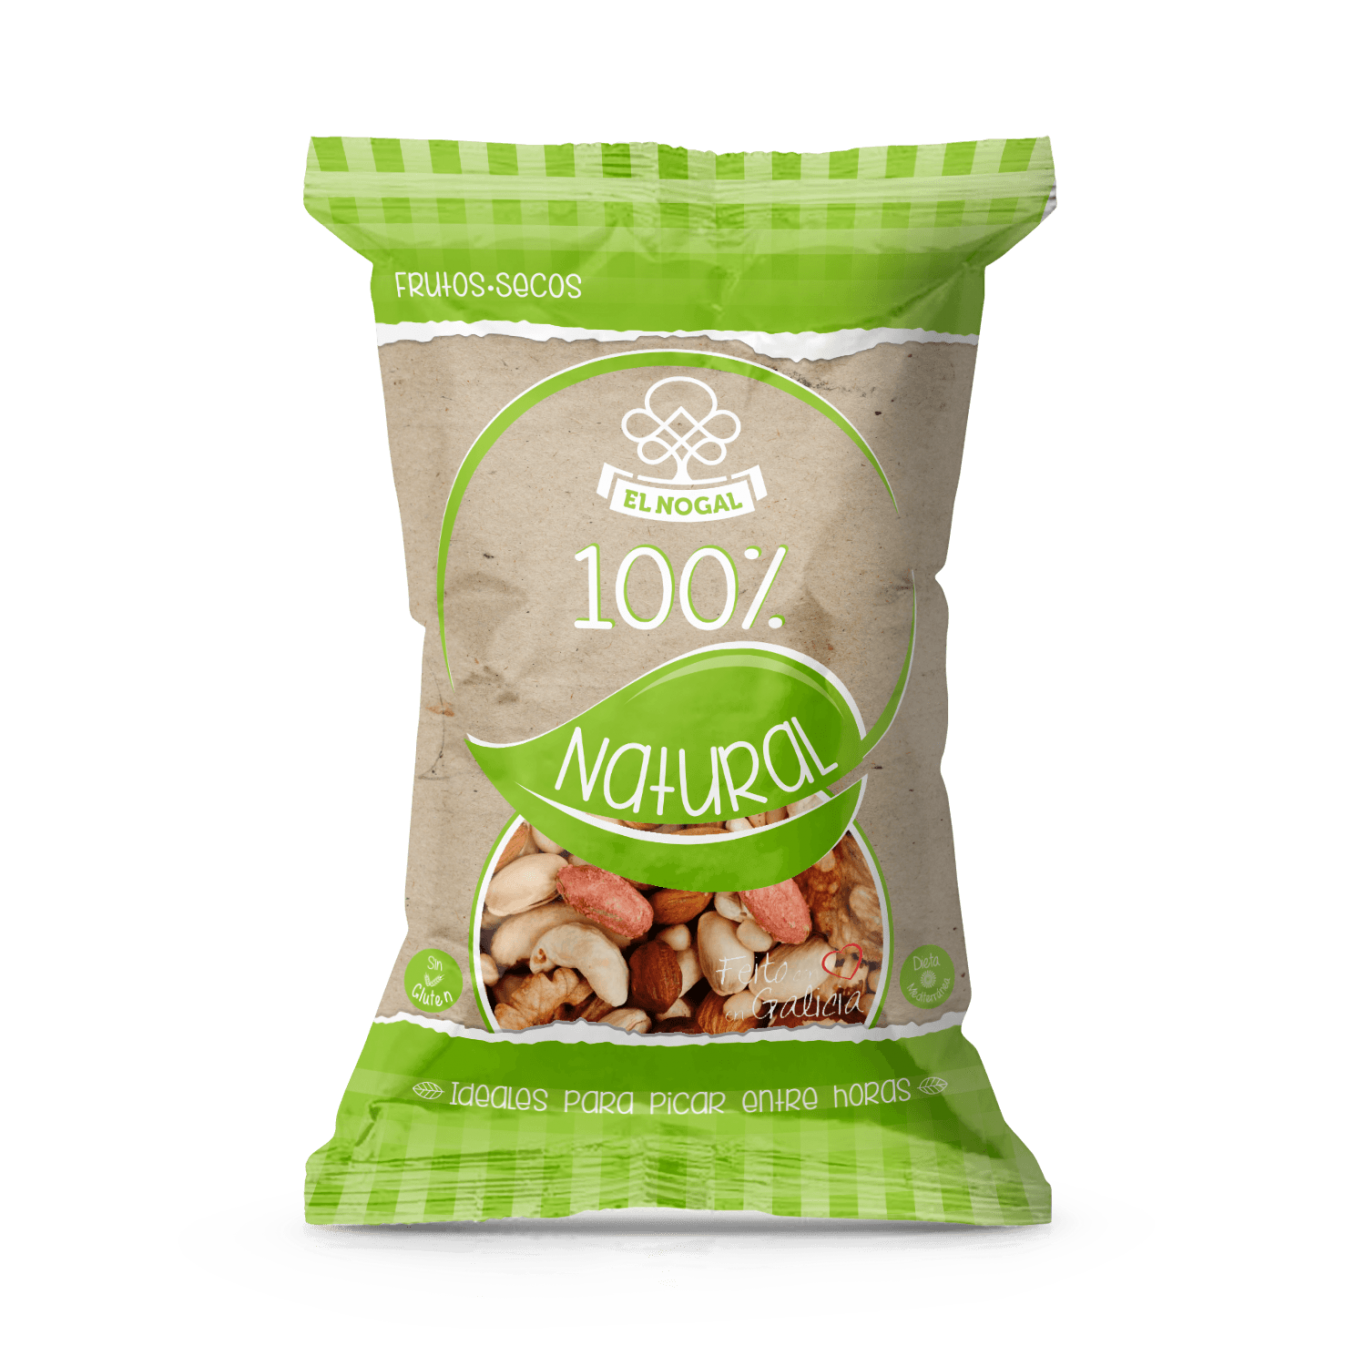 Mix / Almond with skin, skinless almond, cashew, sultana raisin, kernel walnut, raw and unshelled pumpkin see